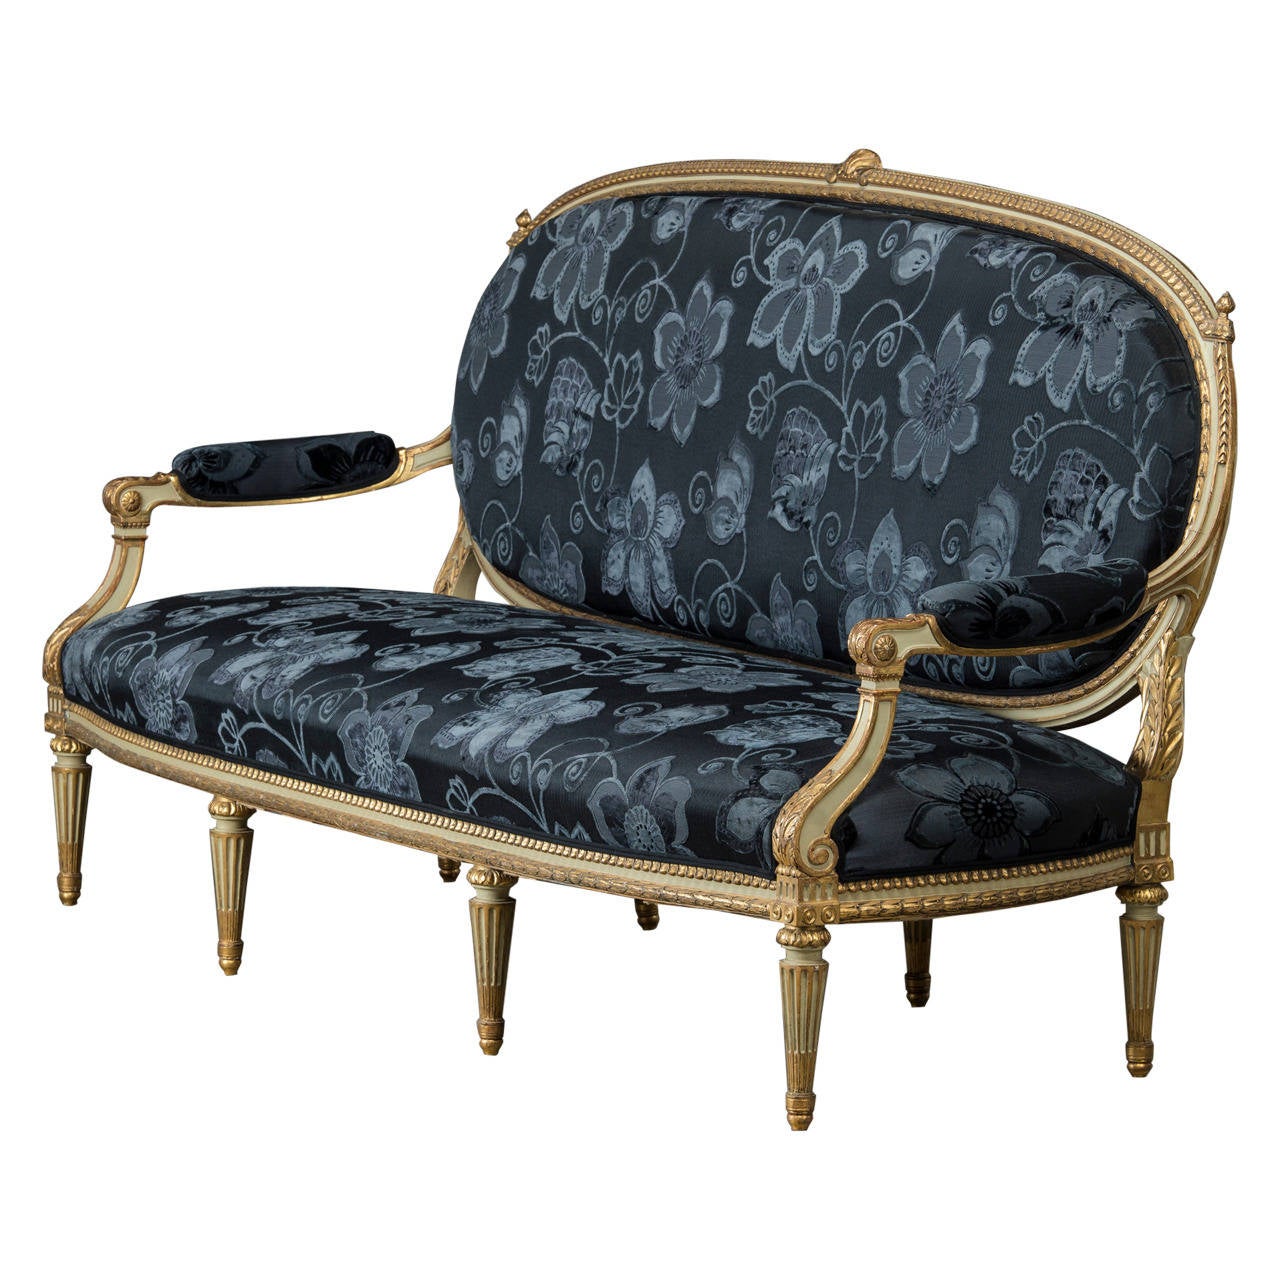 Louis XVI–style canapé, 1860–80, offered by Green Square Copenhagen